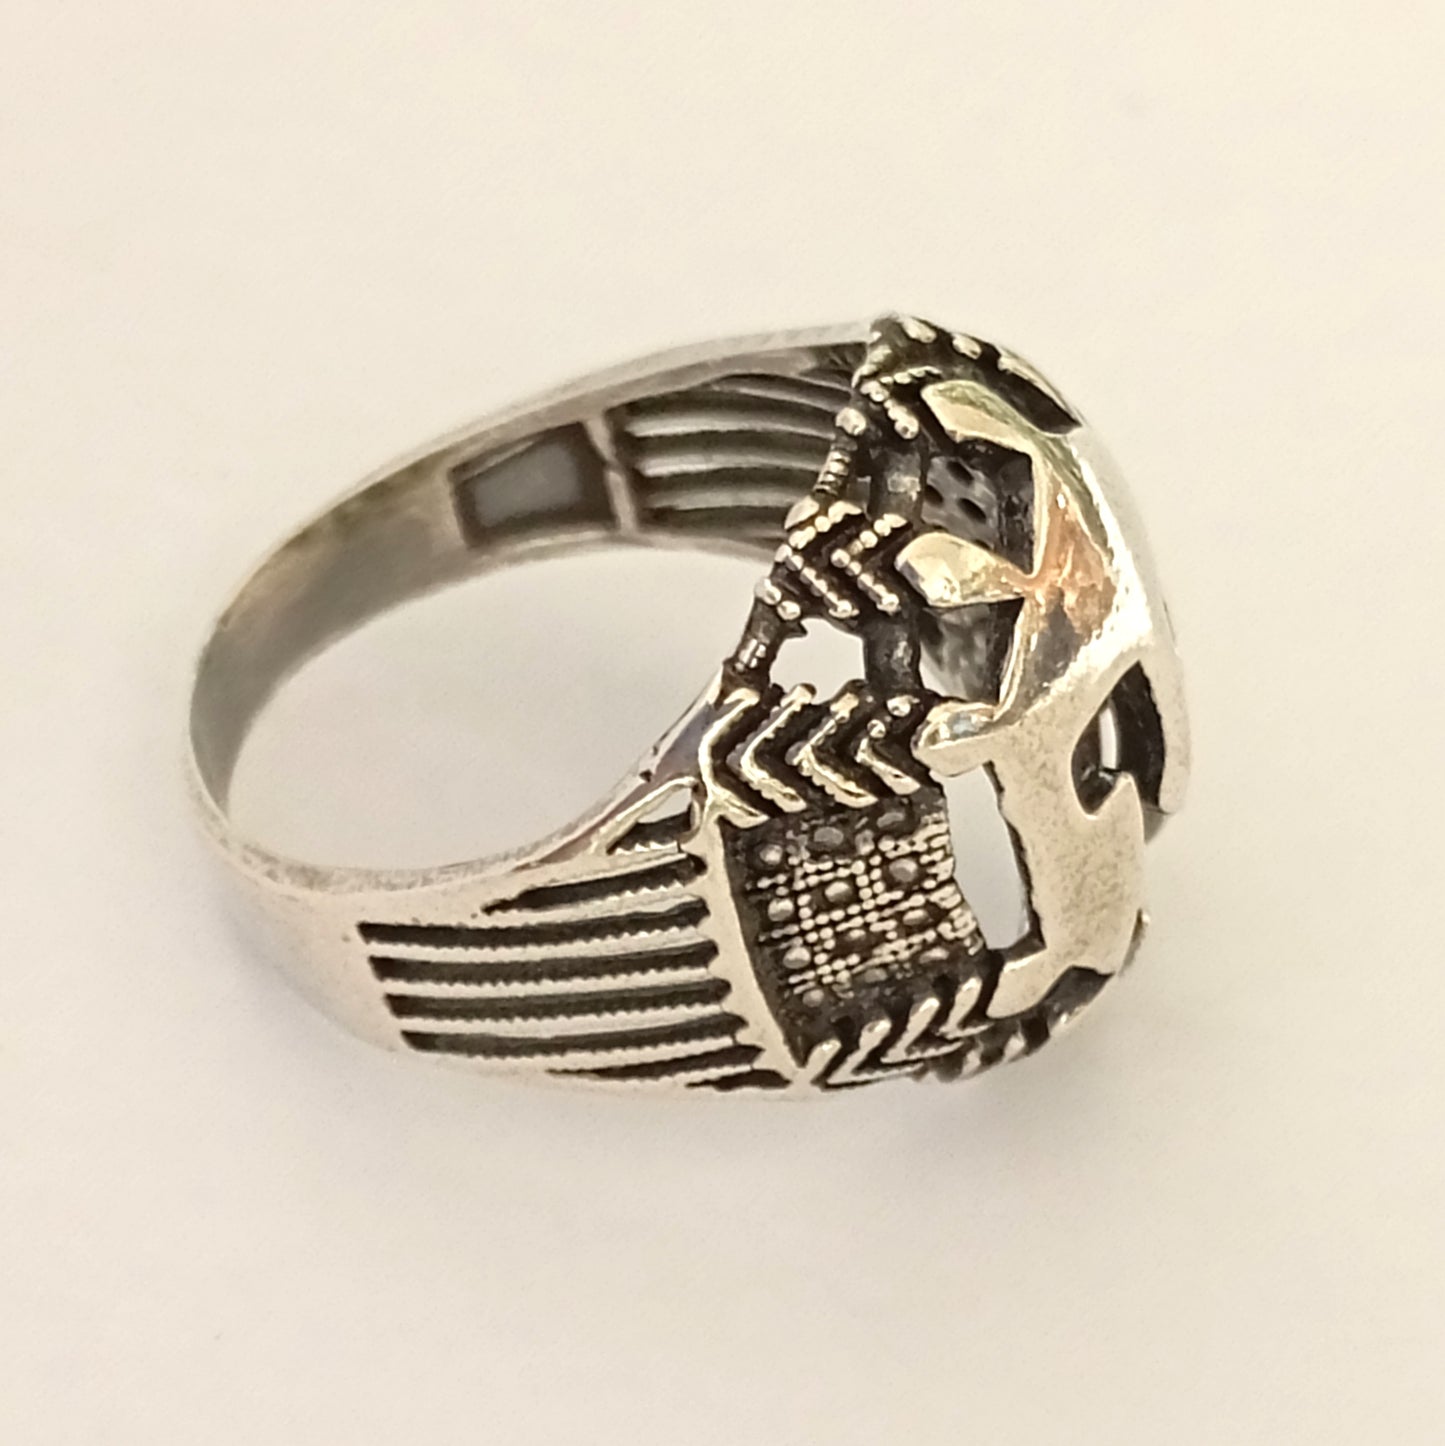 Spartan Helmet - King Leonidas - 300 Spartans - Battle of Thermopylae - 480 BC - Ring - Size EU 62 - Size US 10 - 925 Sterling Silver